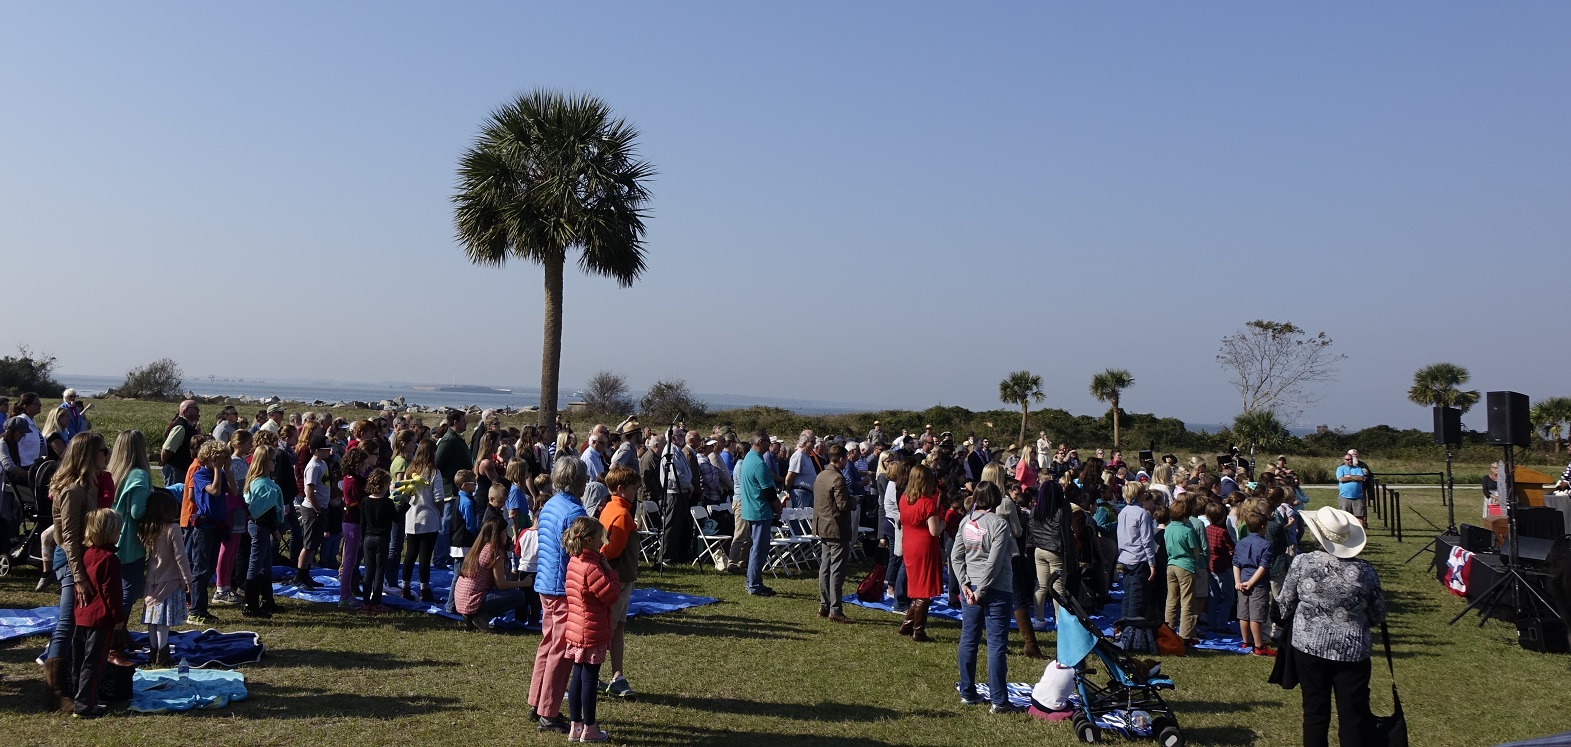 A crowd of about 1,000 people witnesses the ceremonial launch of the Fort Moultrie (Fort Sumter National Monument) quarter on Sullivan's Island.